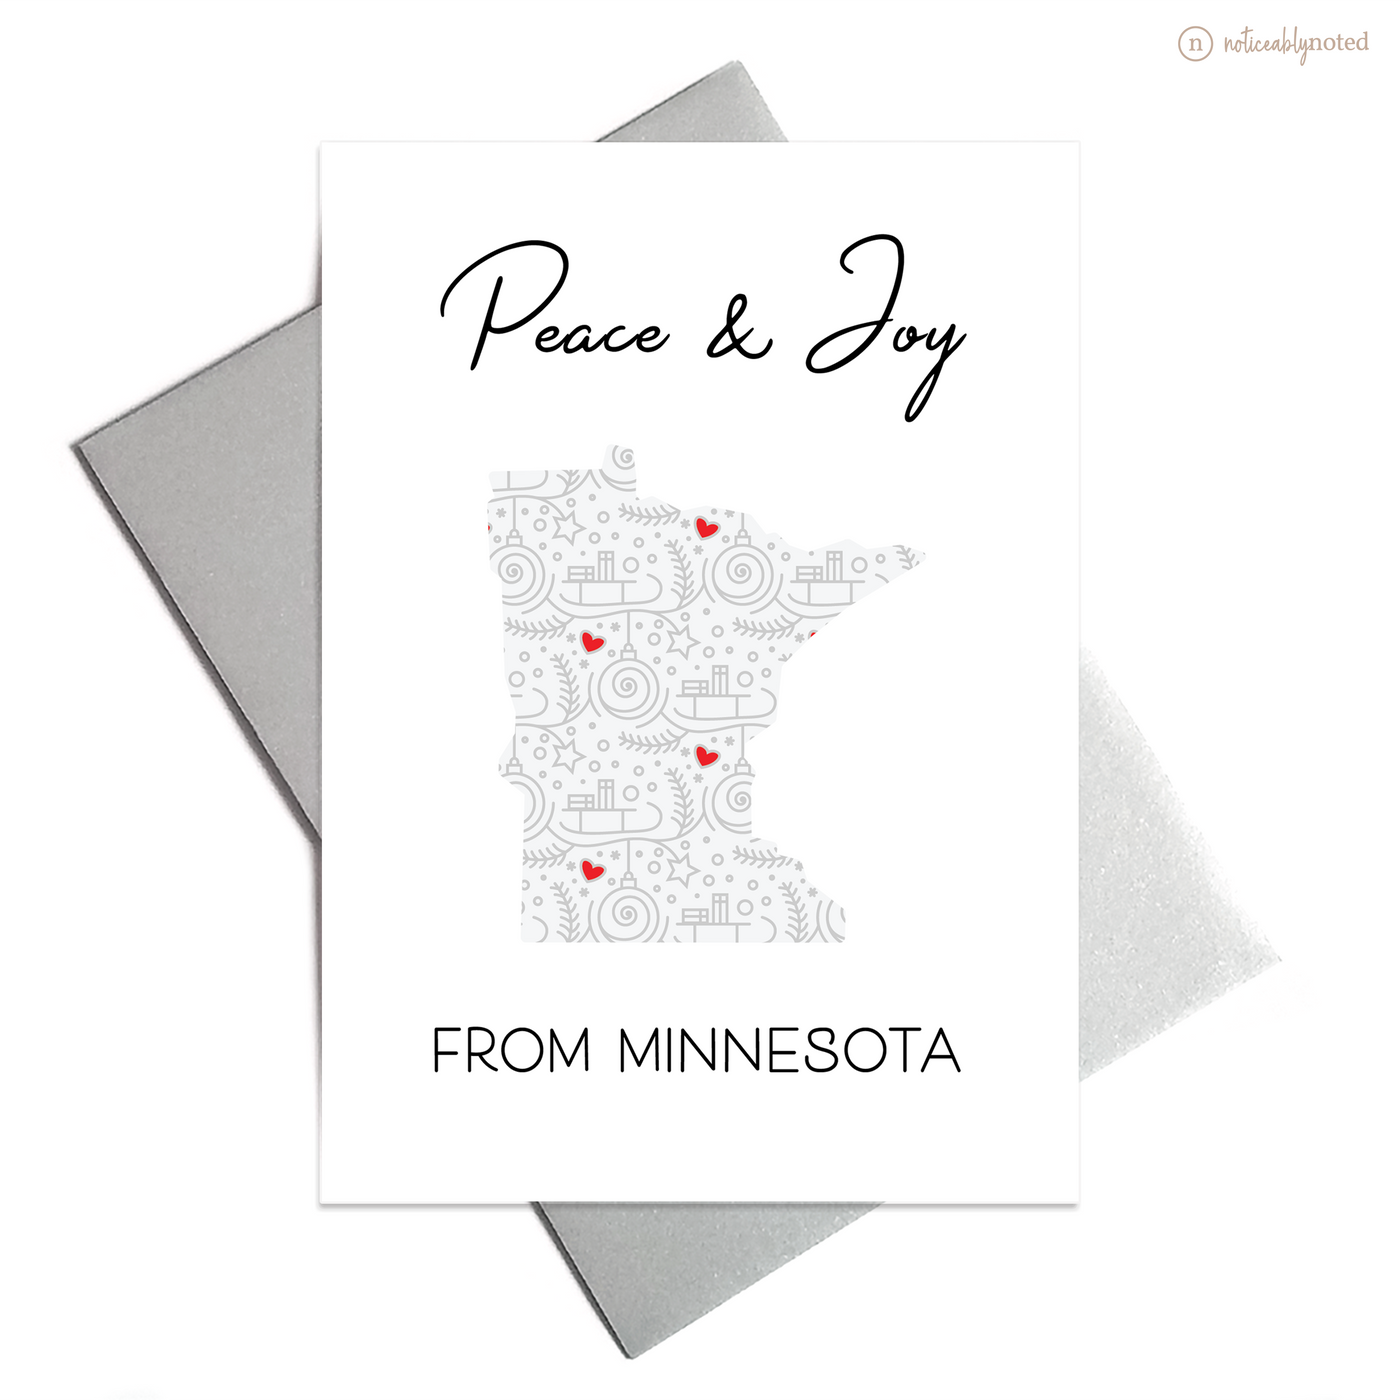 Minnesota Holiday Card | Noticeably Noted